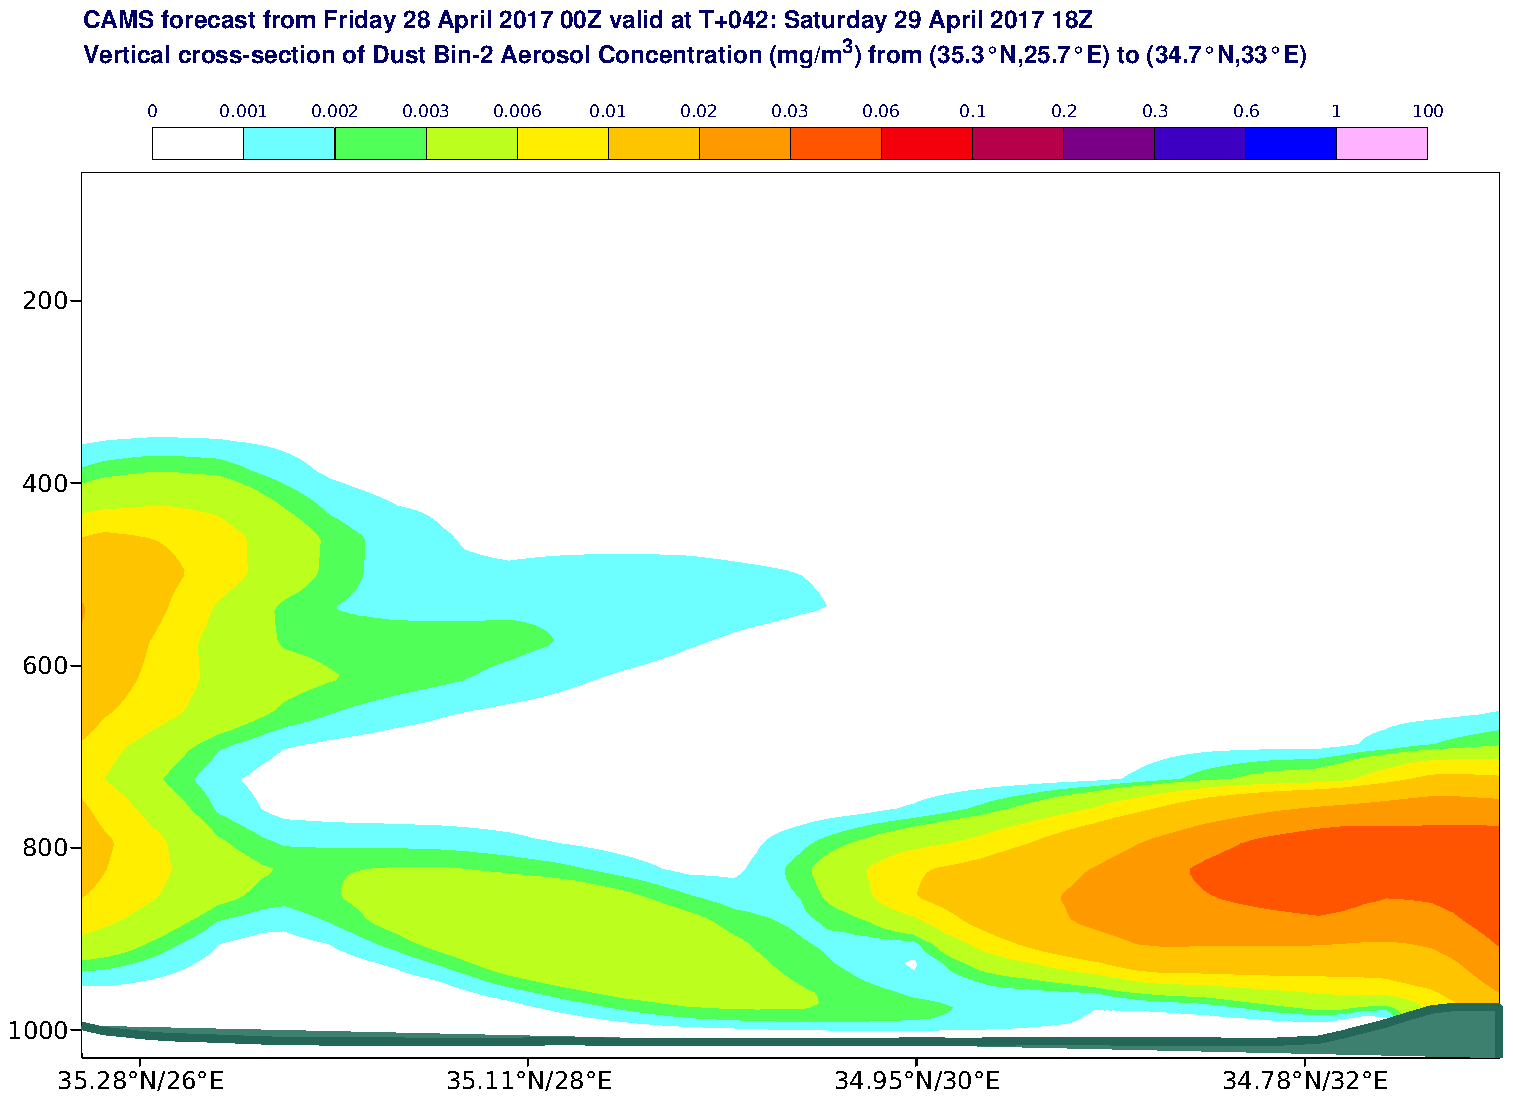 Vertical cross-section of Dust Bin-2 Aerosol Concentration (mg/m3) valid at T42 - 2017-04-29 18:00